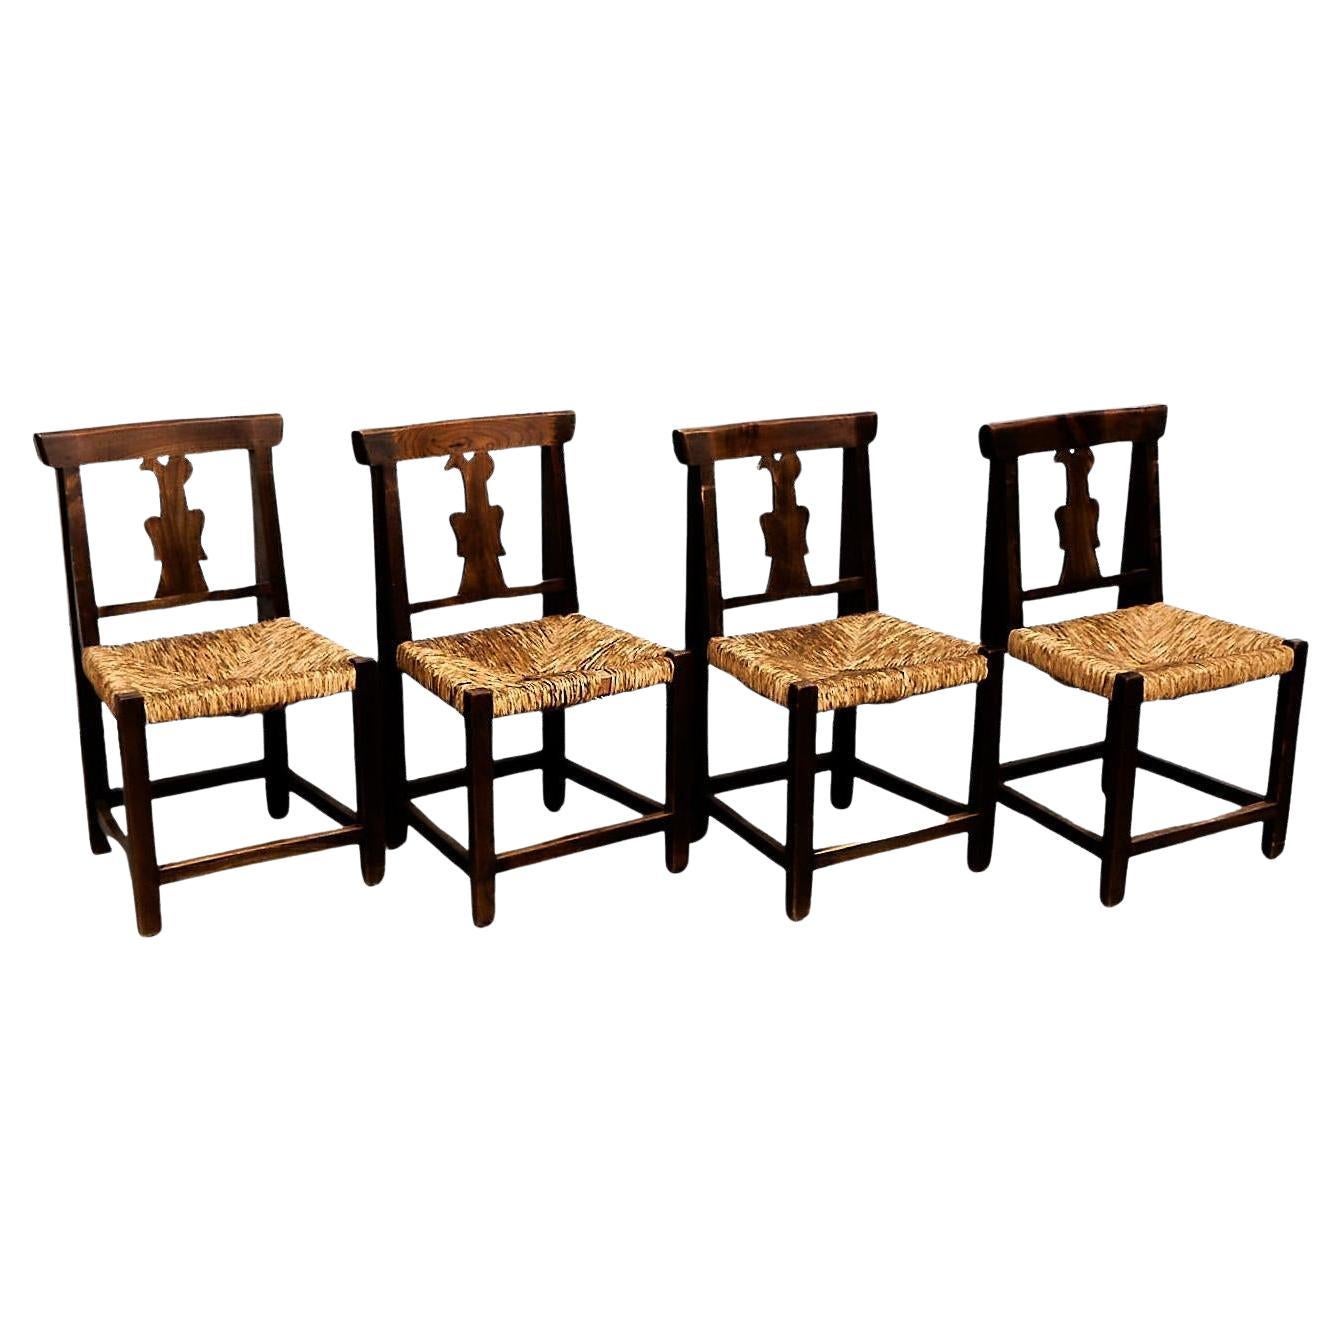 Set of Four Rustic Wood French Chairs, circa 1950 For Sale